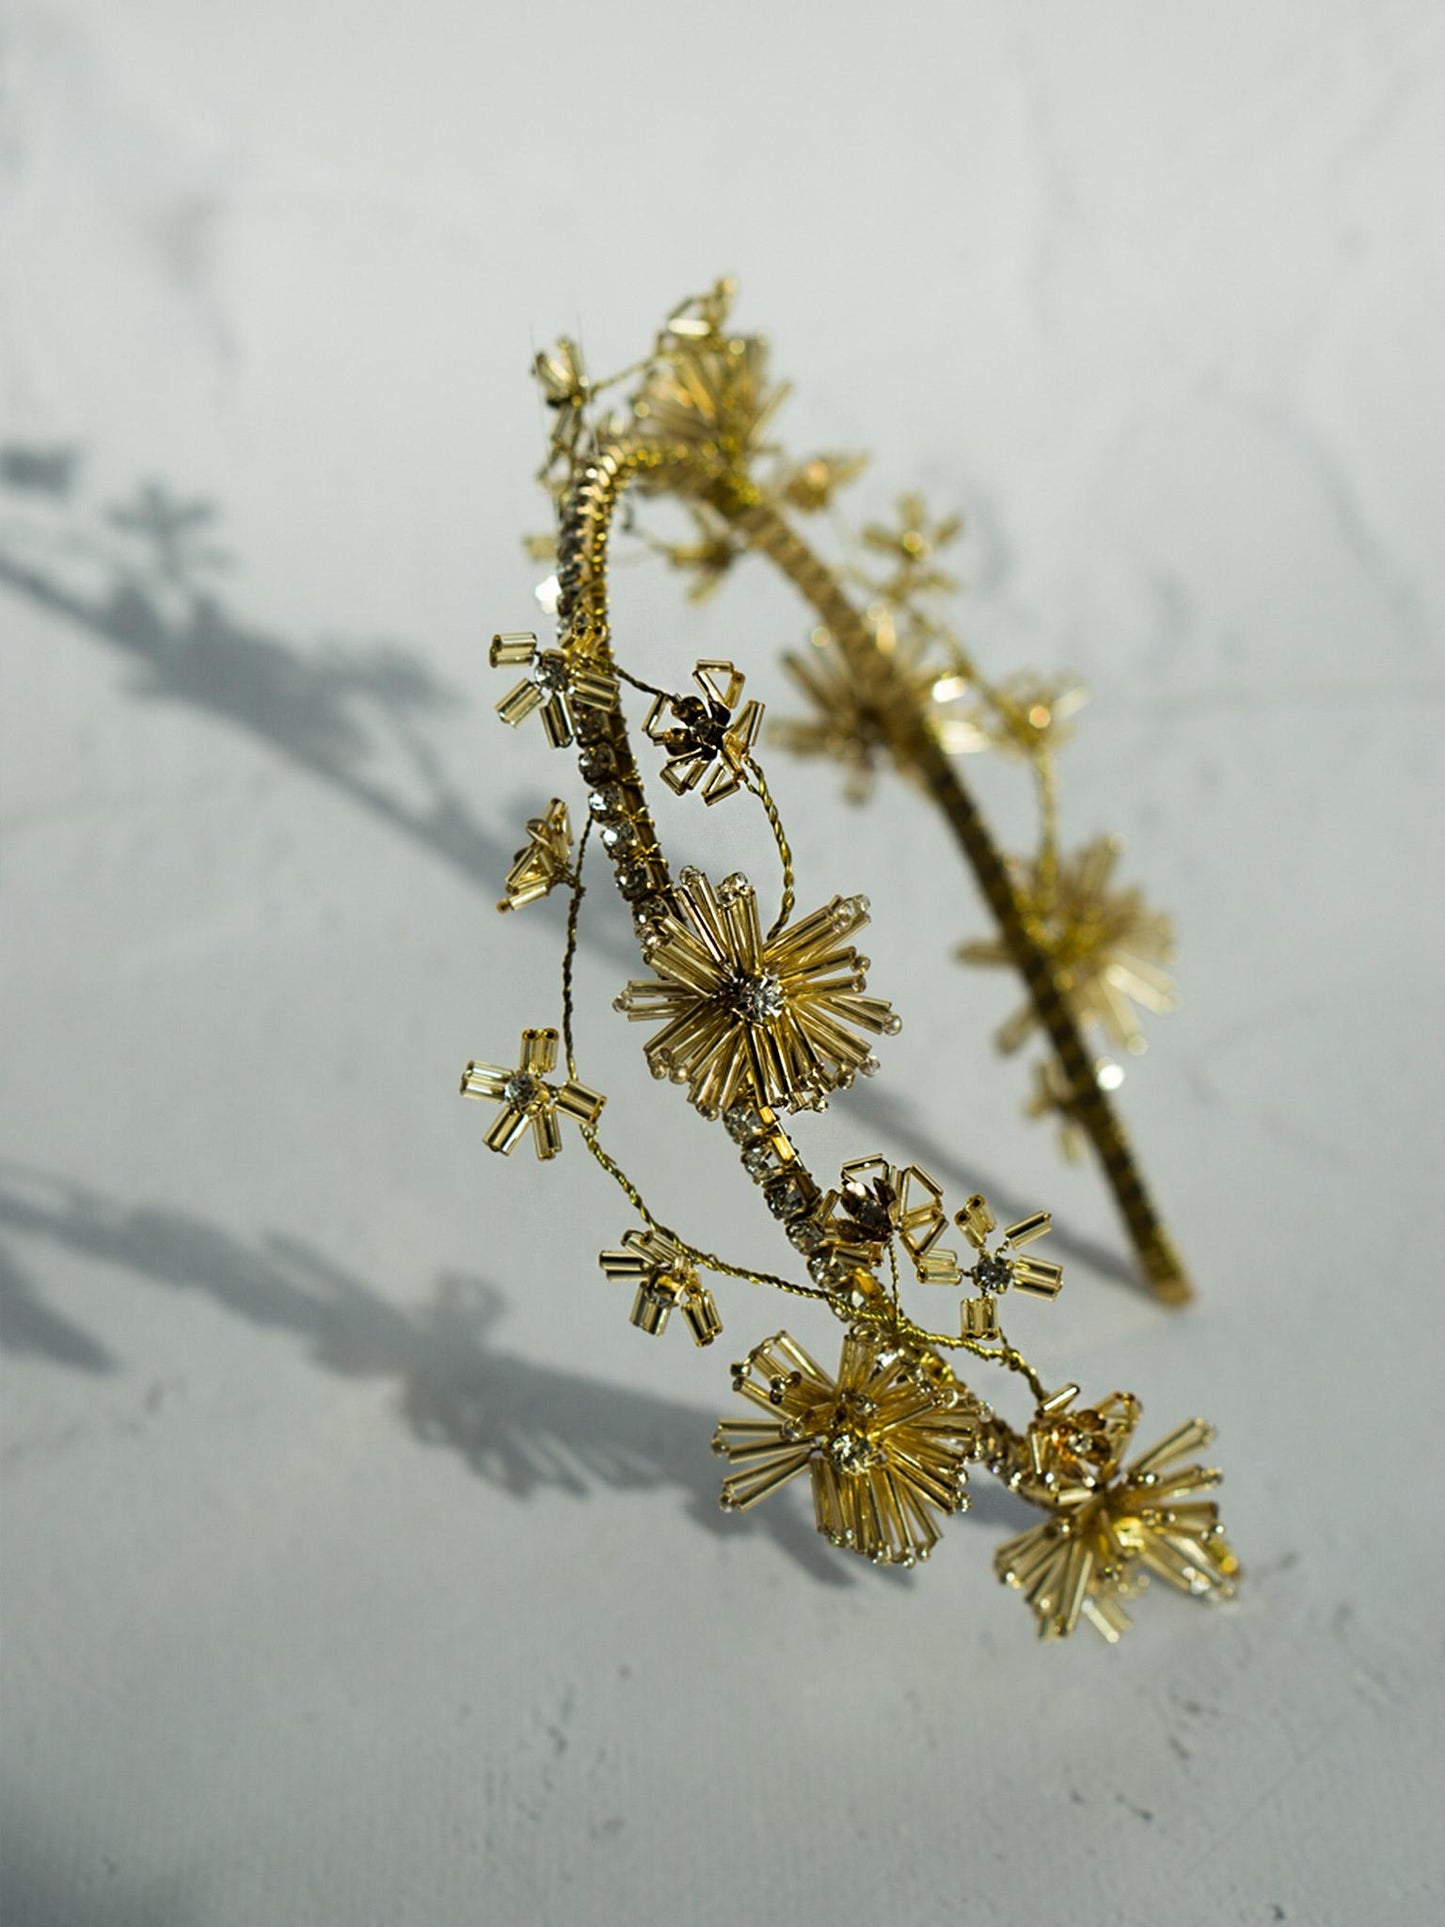 Floral headband with dainty dandelions and shimmering crystals